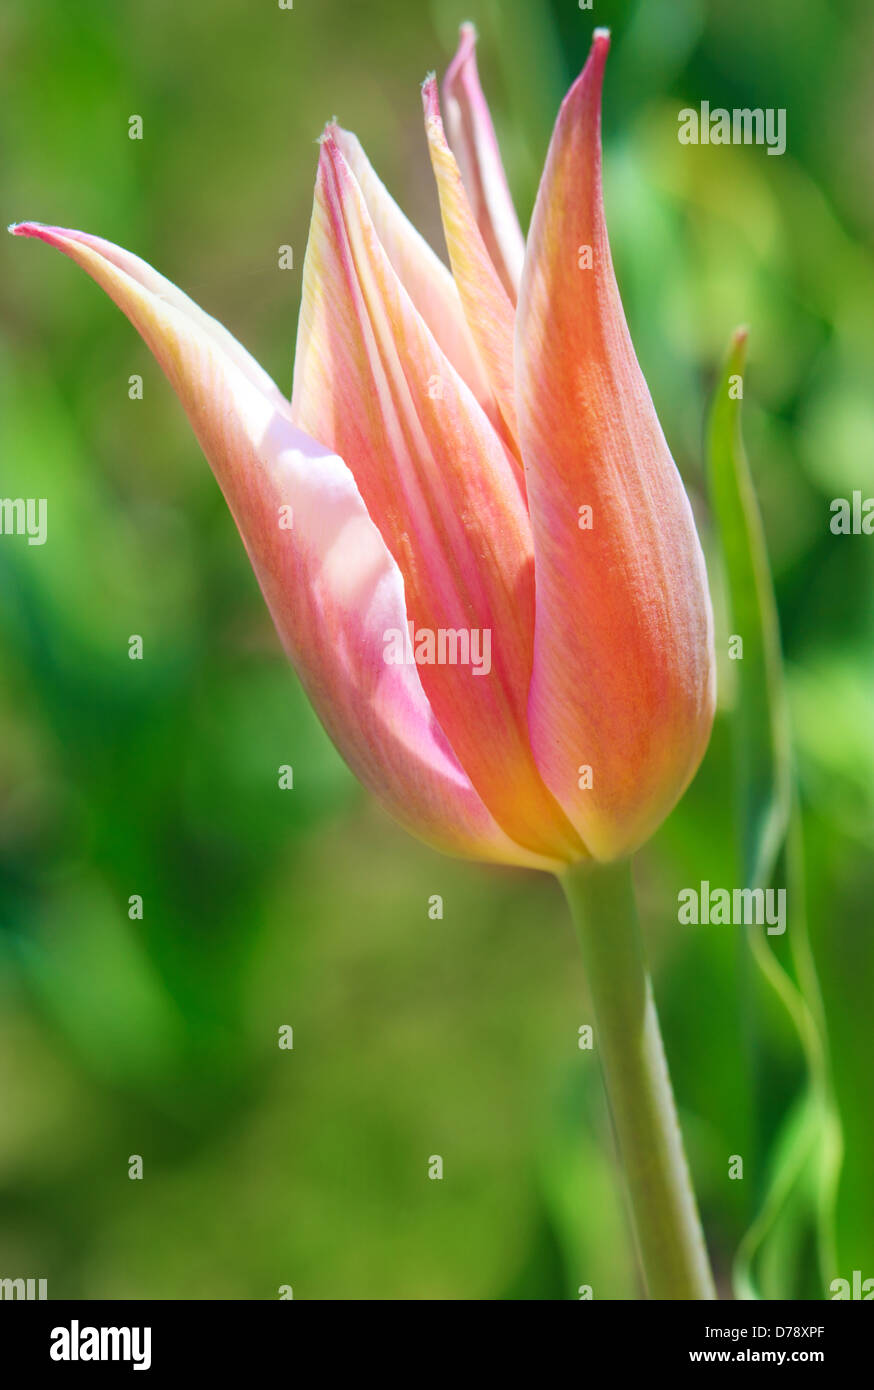 Pink tulip flower on green background Stock Photo